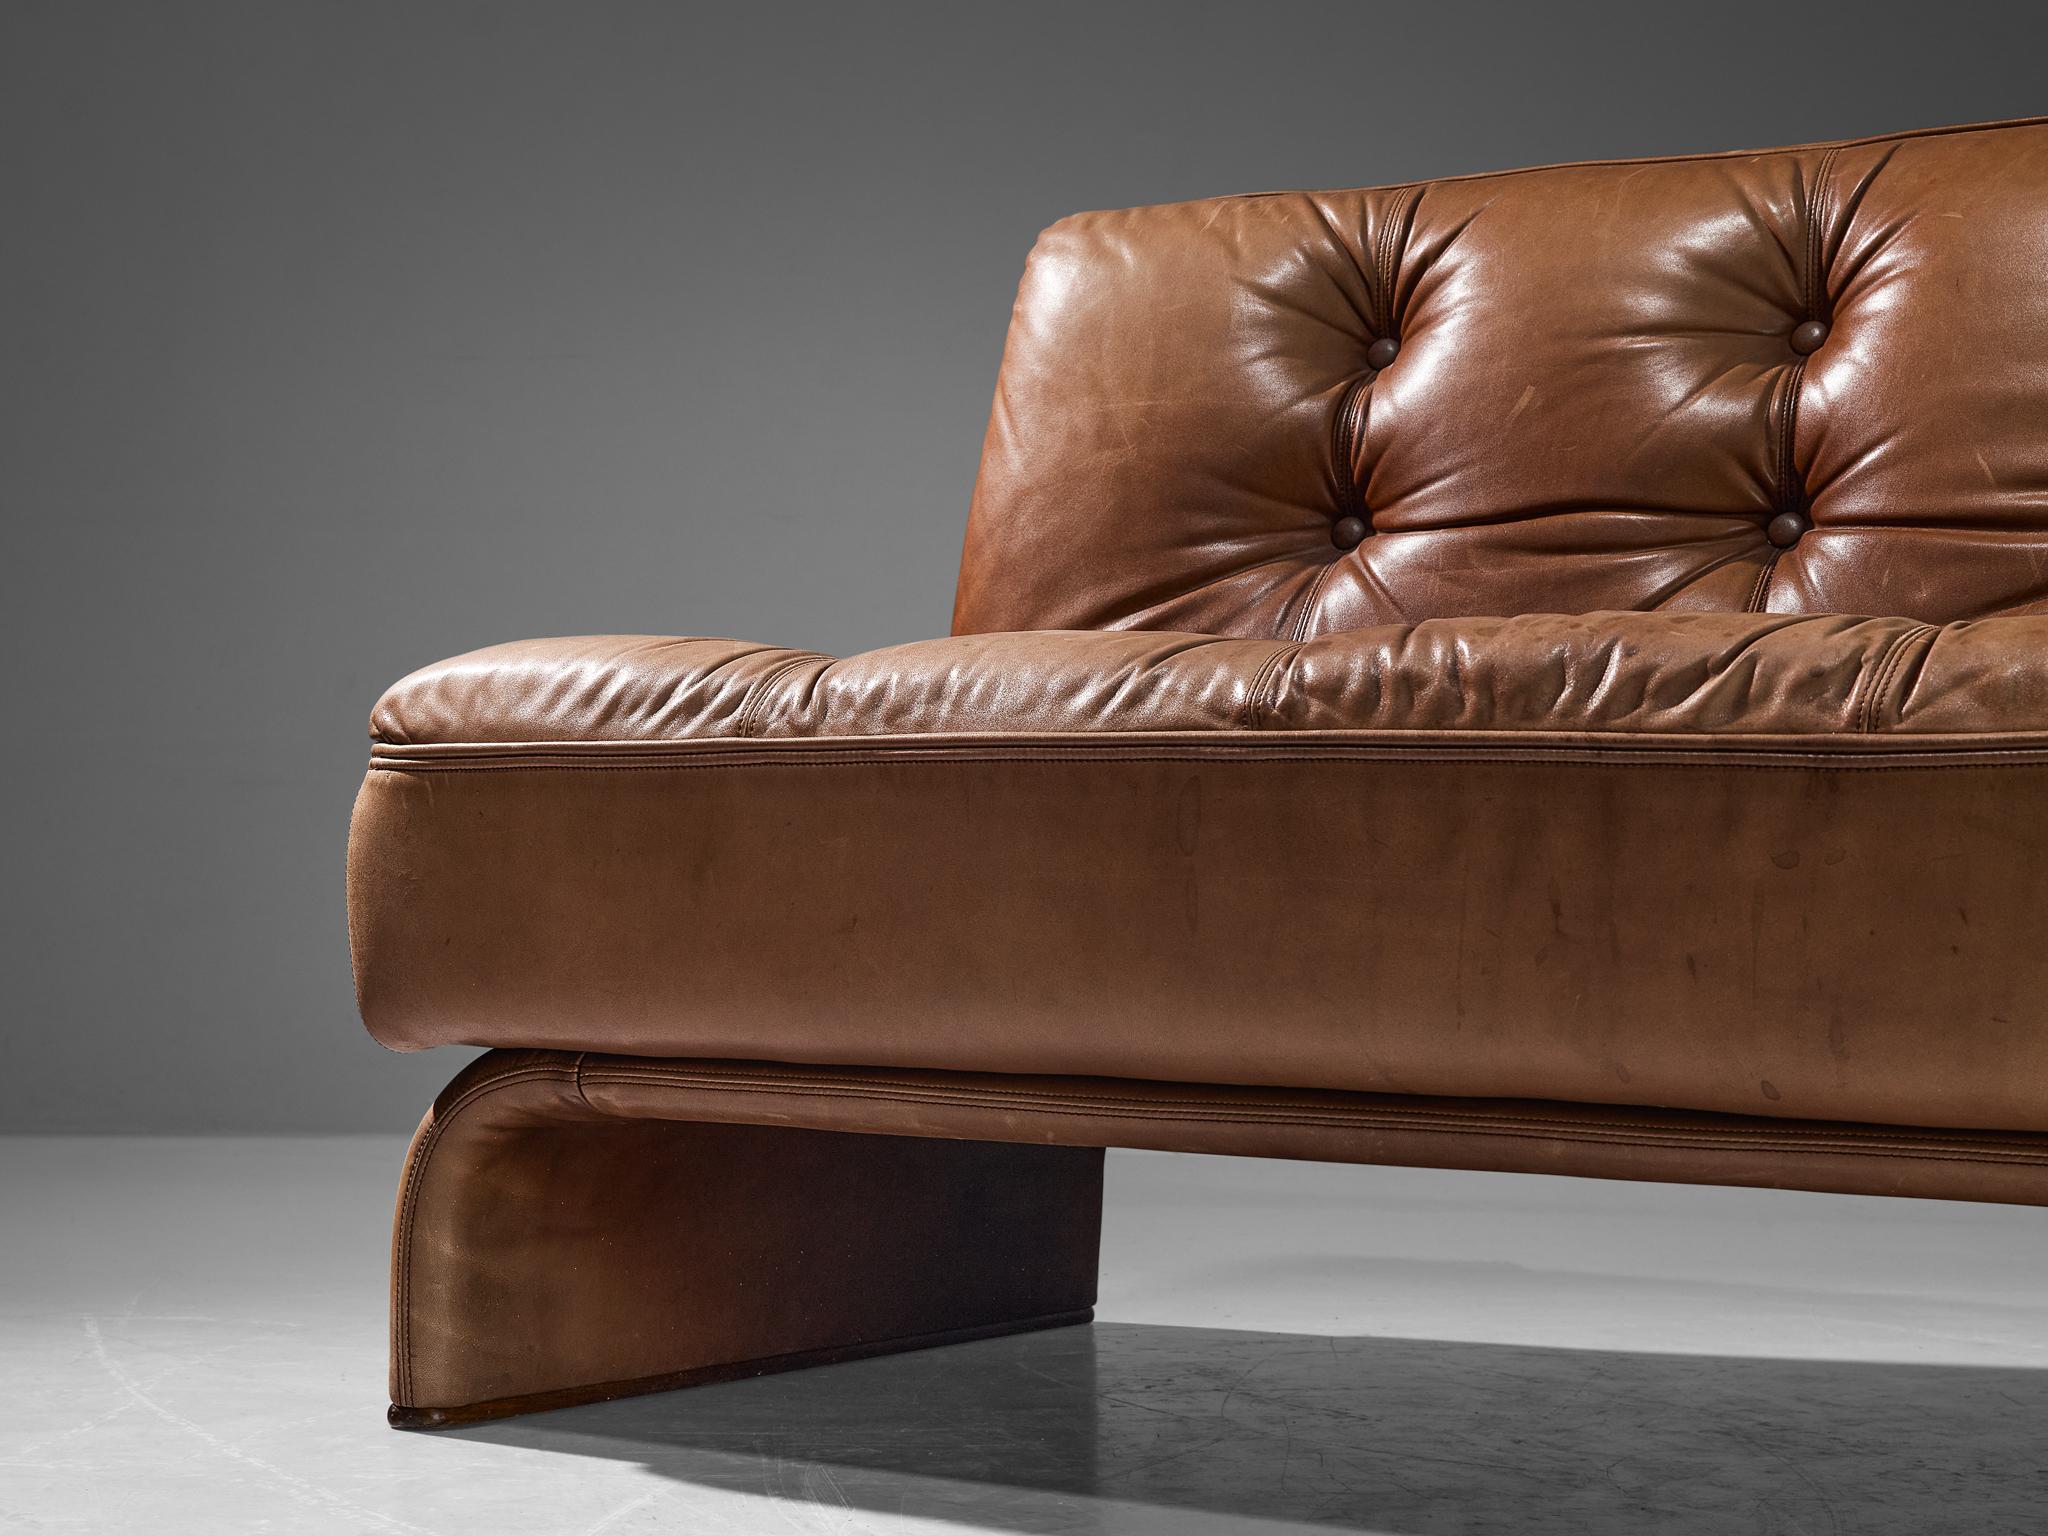 Metal Johannes Spalt for Wittmann 'Constanze' Sofa or Daybed in Cognac Leather  For Sale